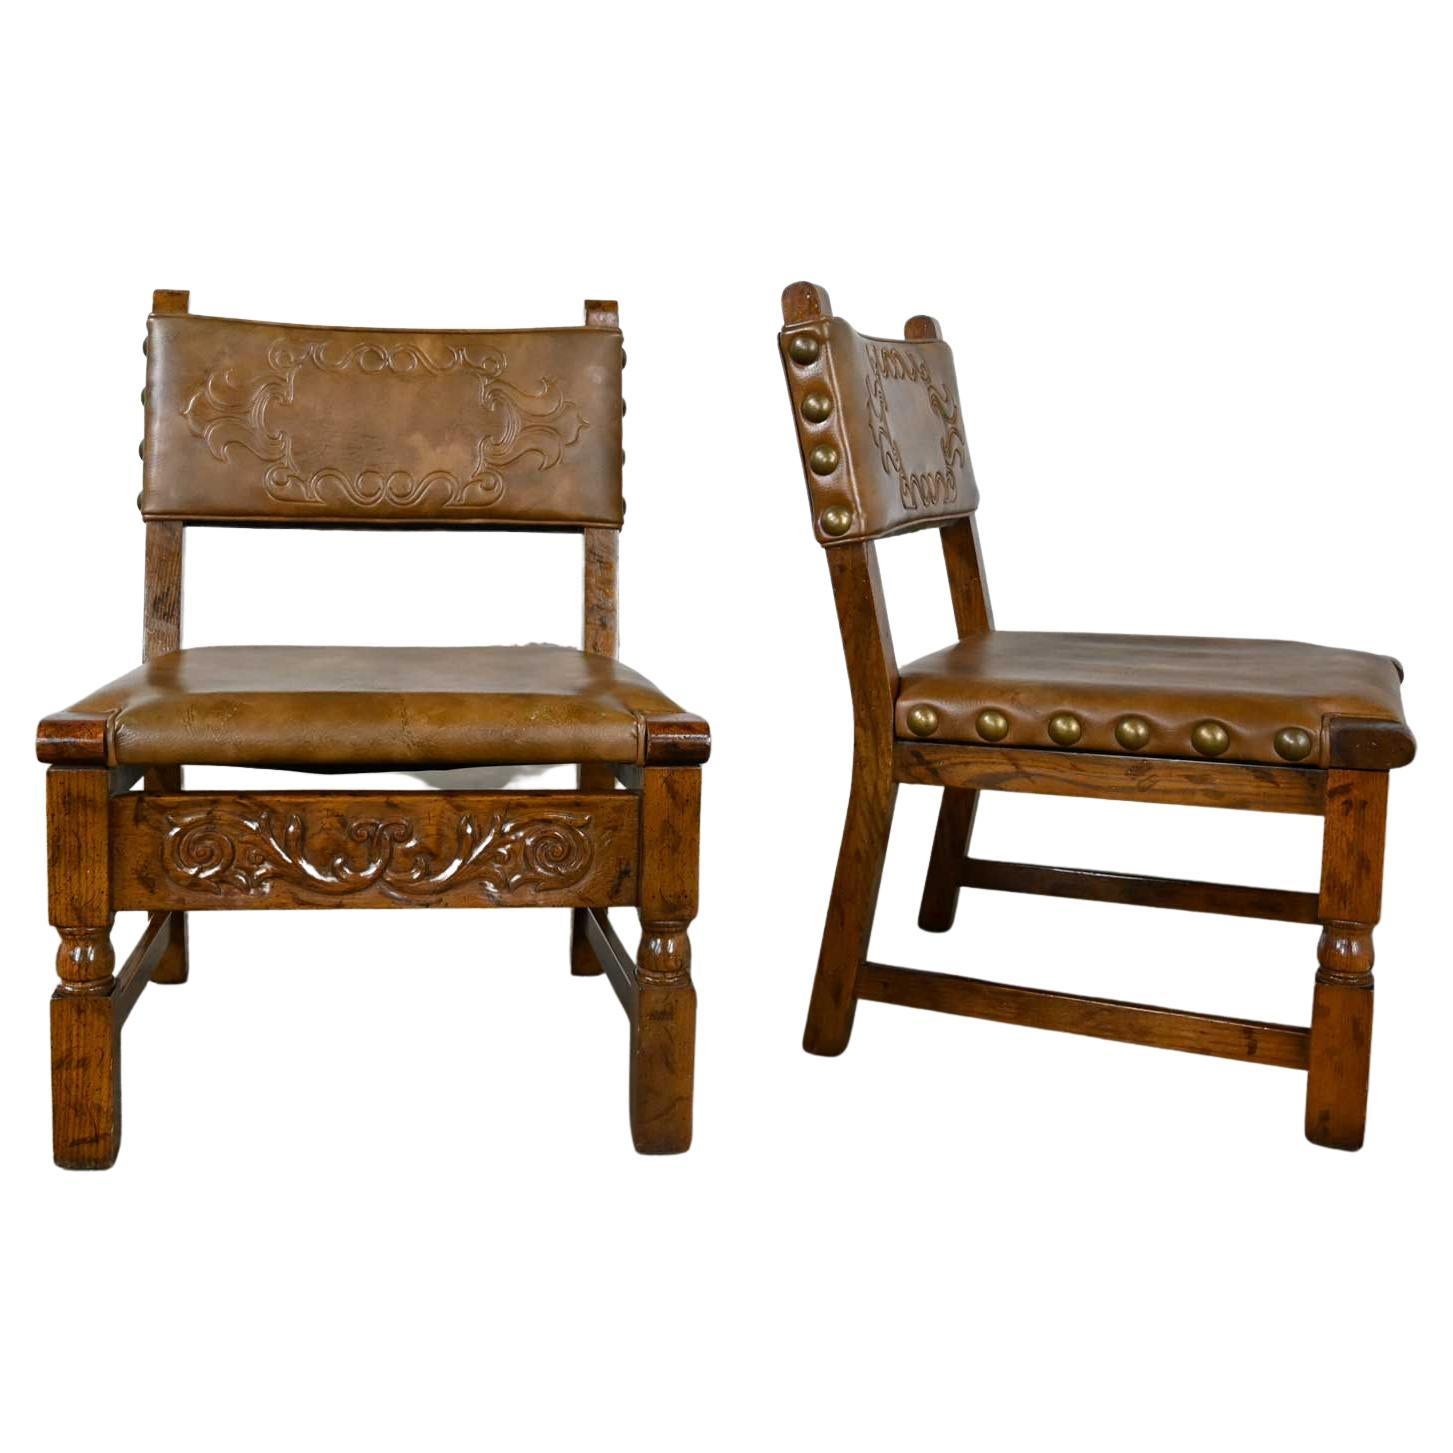 Vintage Spanish Revival Oak Pair of Chairs with Tooled Cognac Faux Leather Seat